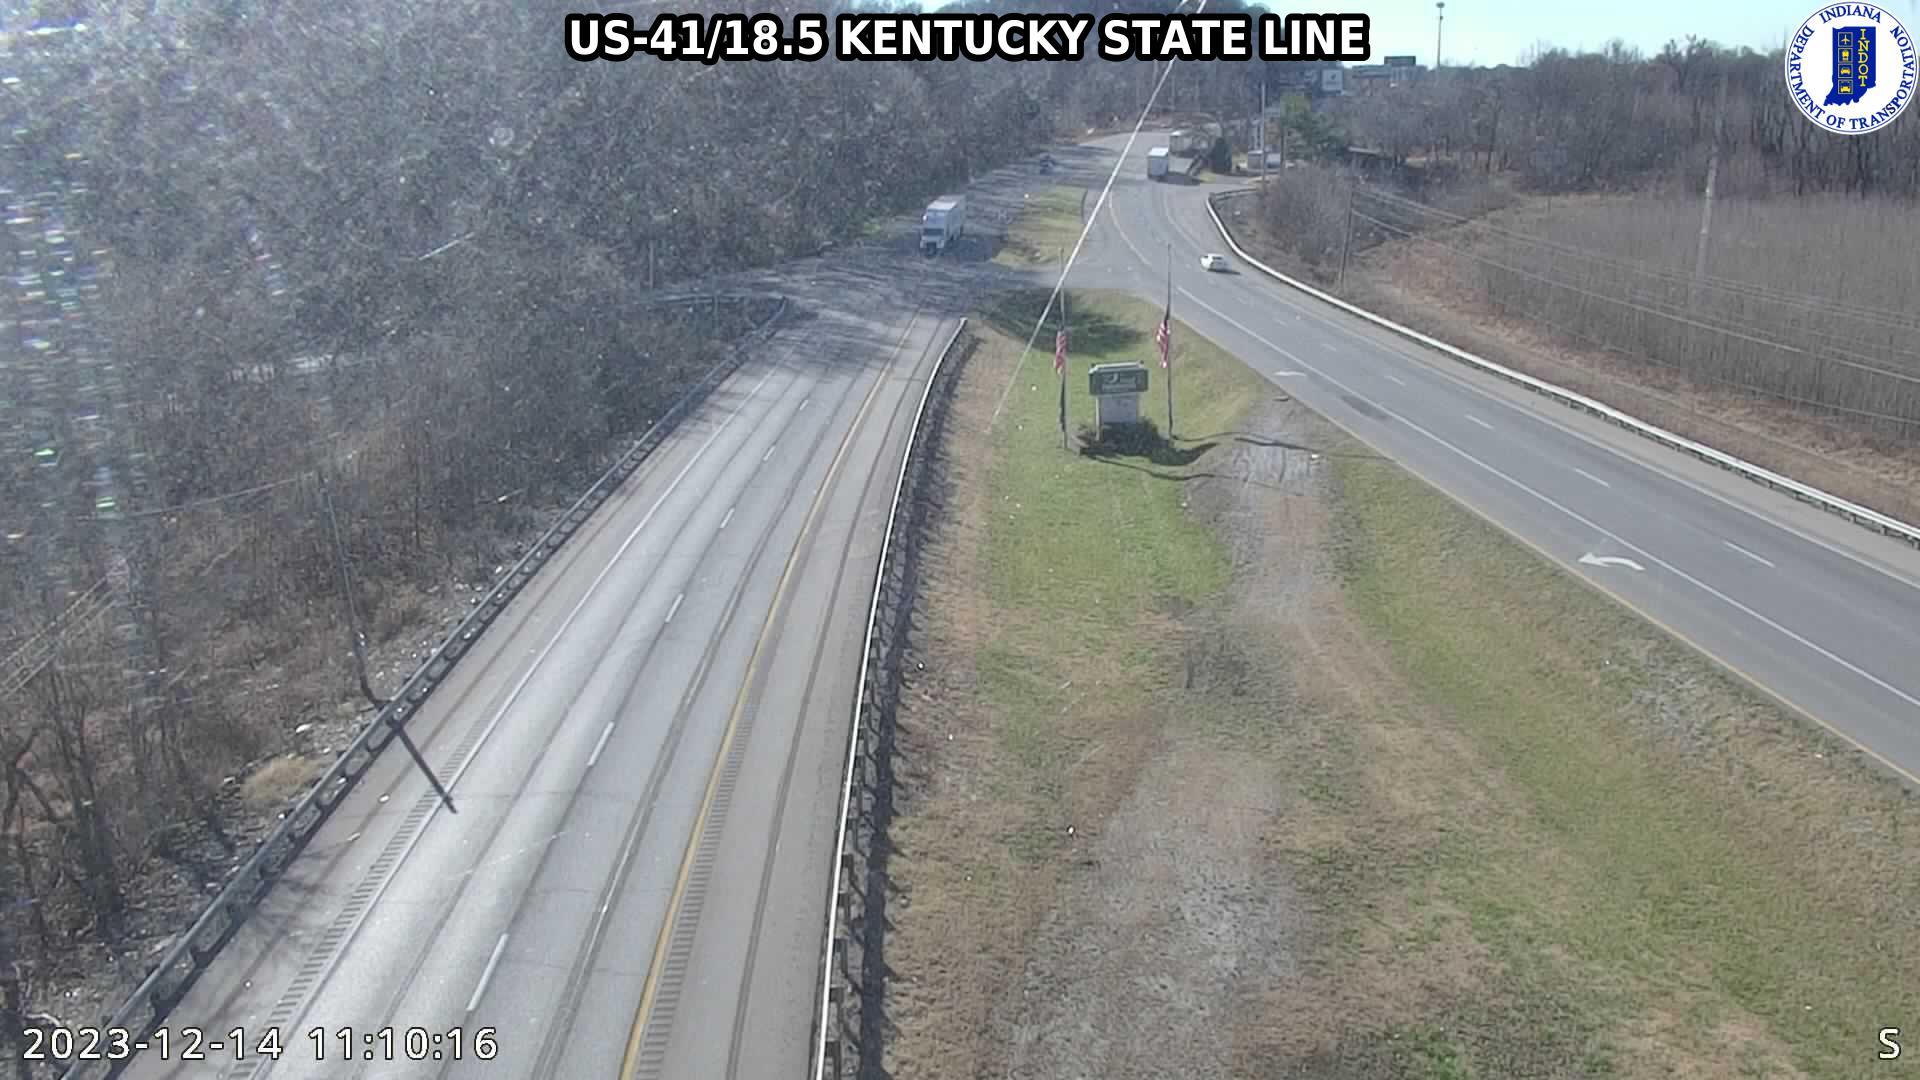 Traffic Cam Henderson: KY US-41: US-41/18.5 - STATE LINE: US-41/18.5 - STATE LINE Player